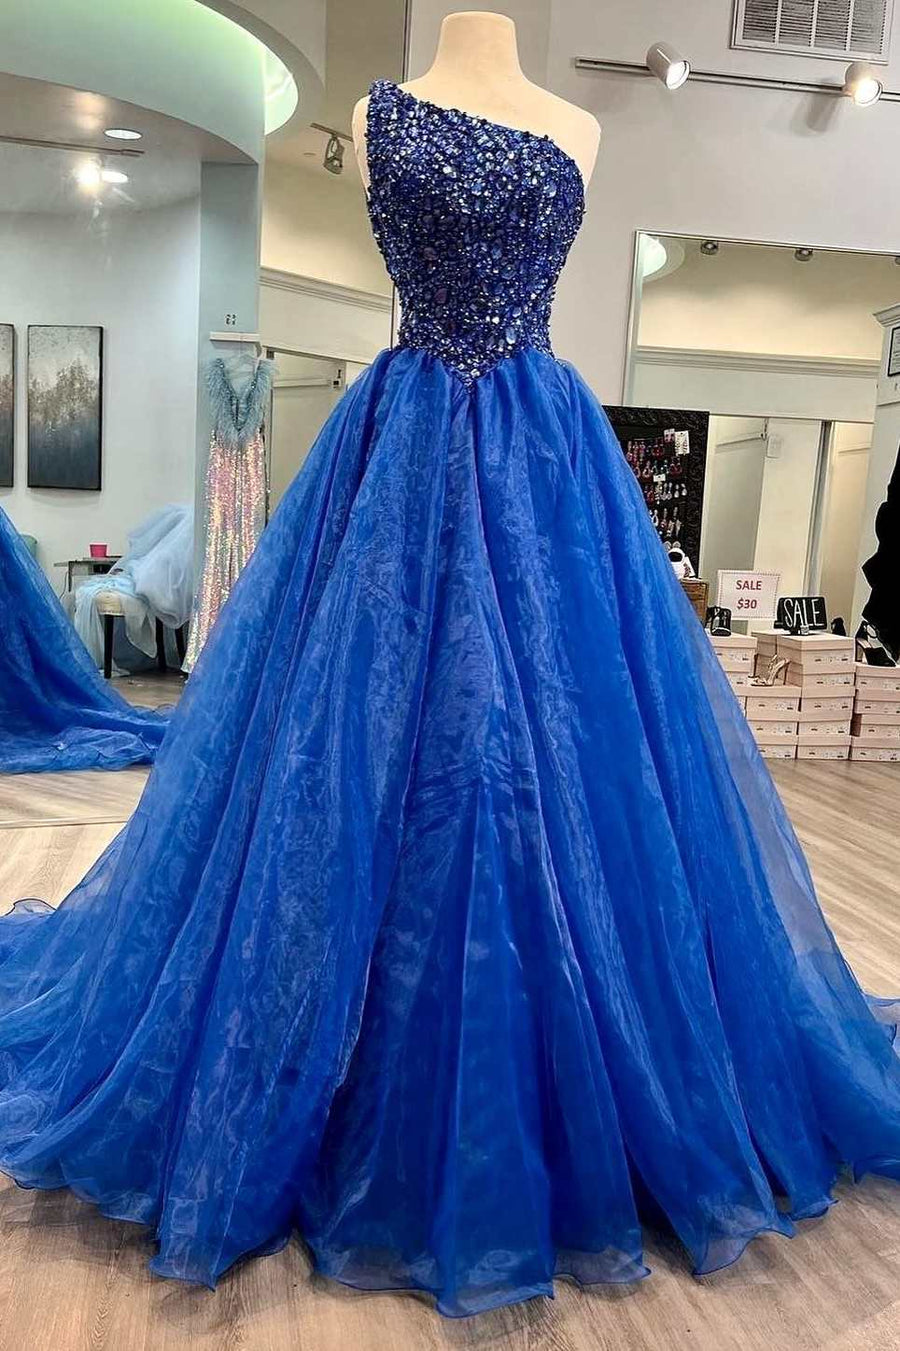 Lovely Blue Beaded One-Shoulder A-Line Gown